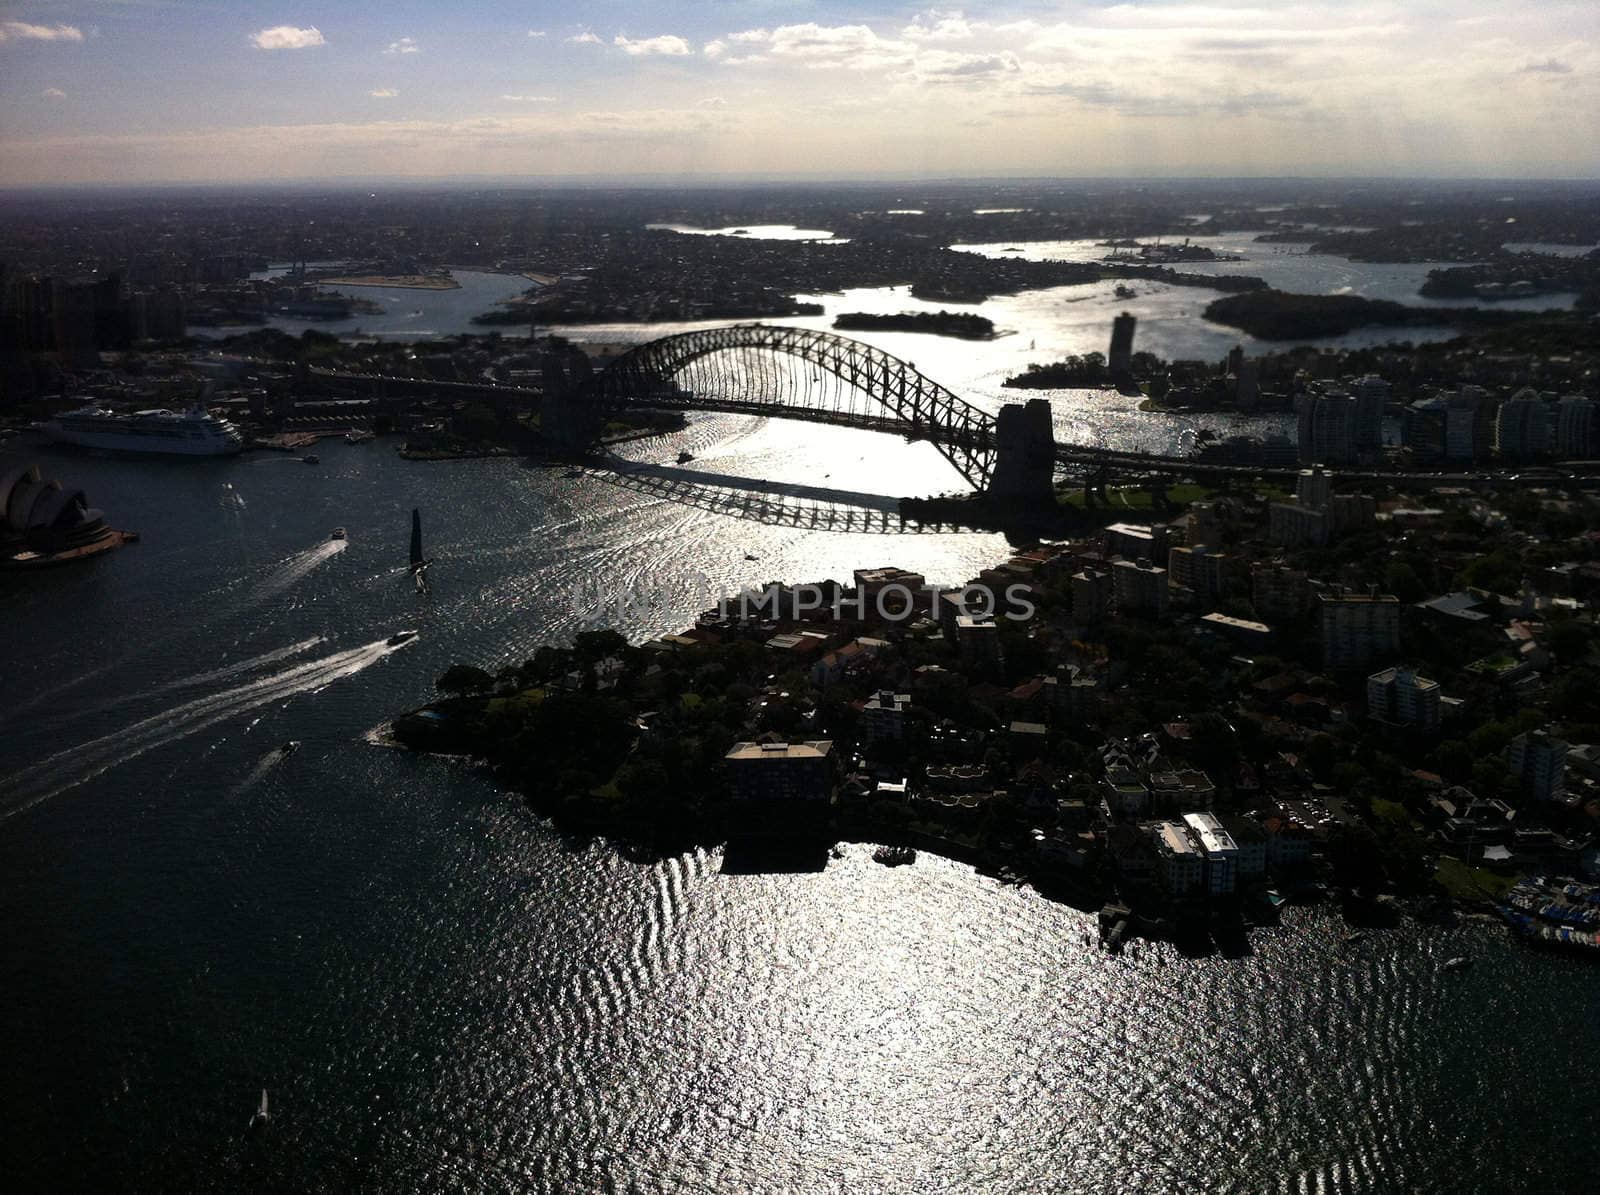 Sydney Harbour from the air by stevemunro